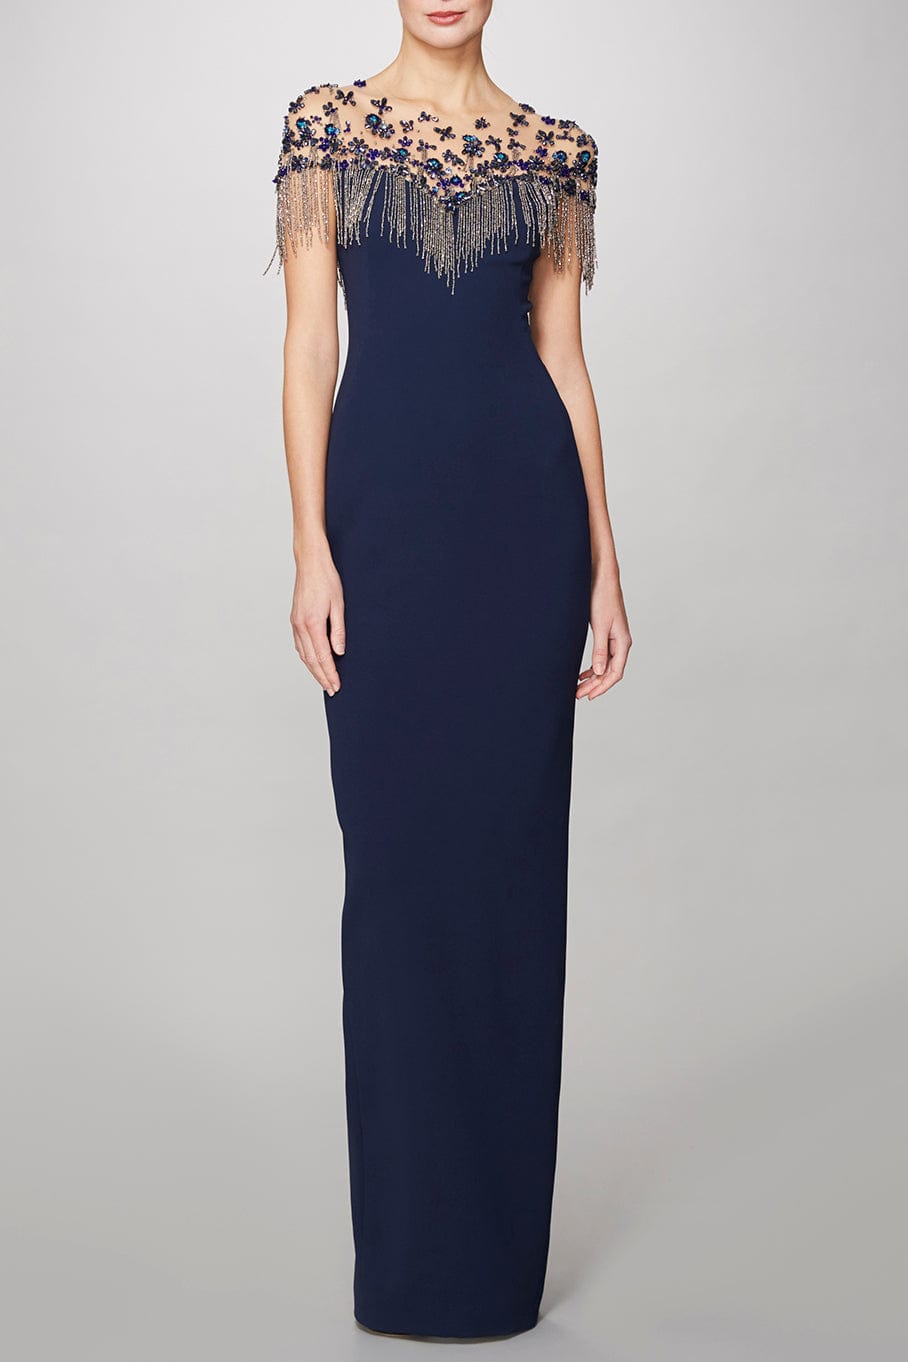 PAMELLA ROLAND-Embroidery Gown With Beaded Fringe-